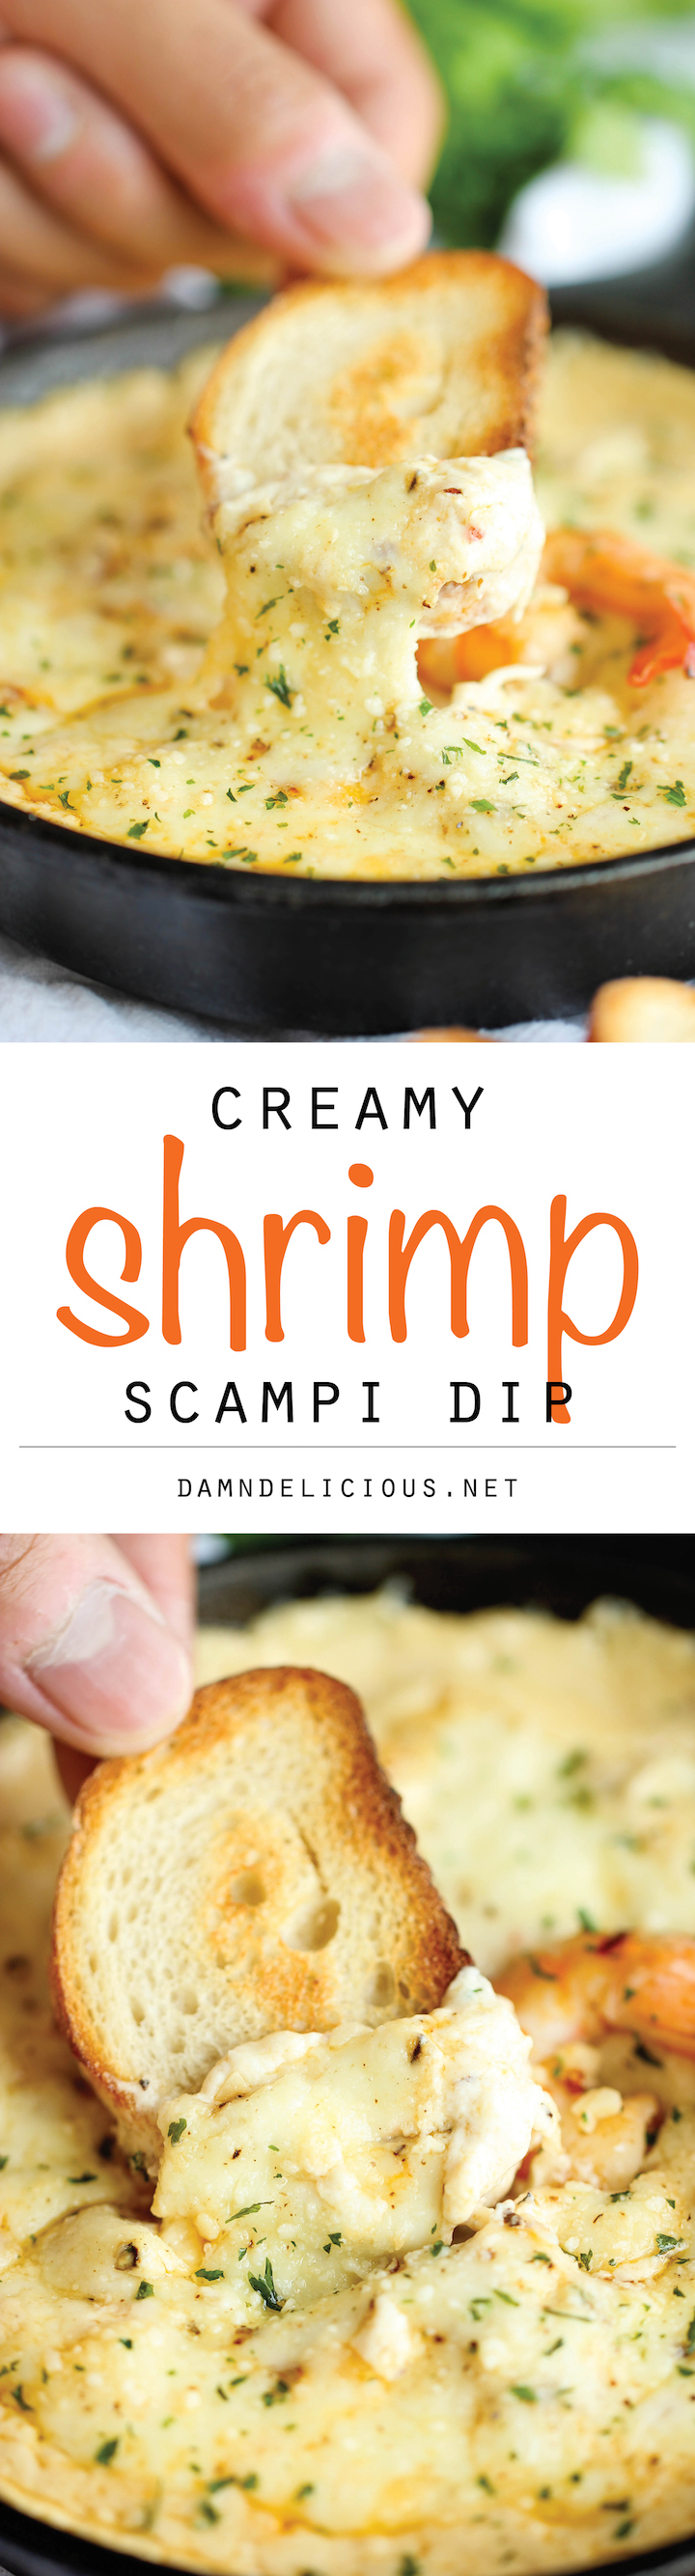 Shrimp Scampi Dip - One of the best dips I've ever had, baked to absolute creamy, cheesy perfection!